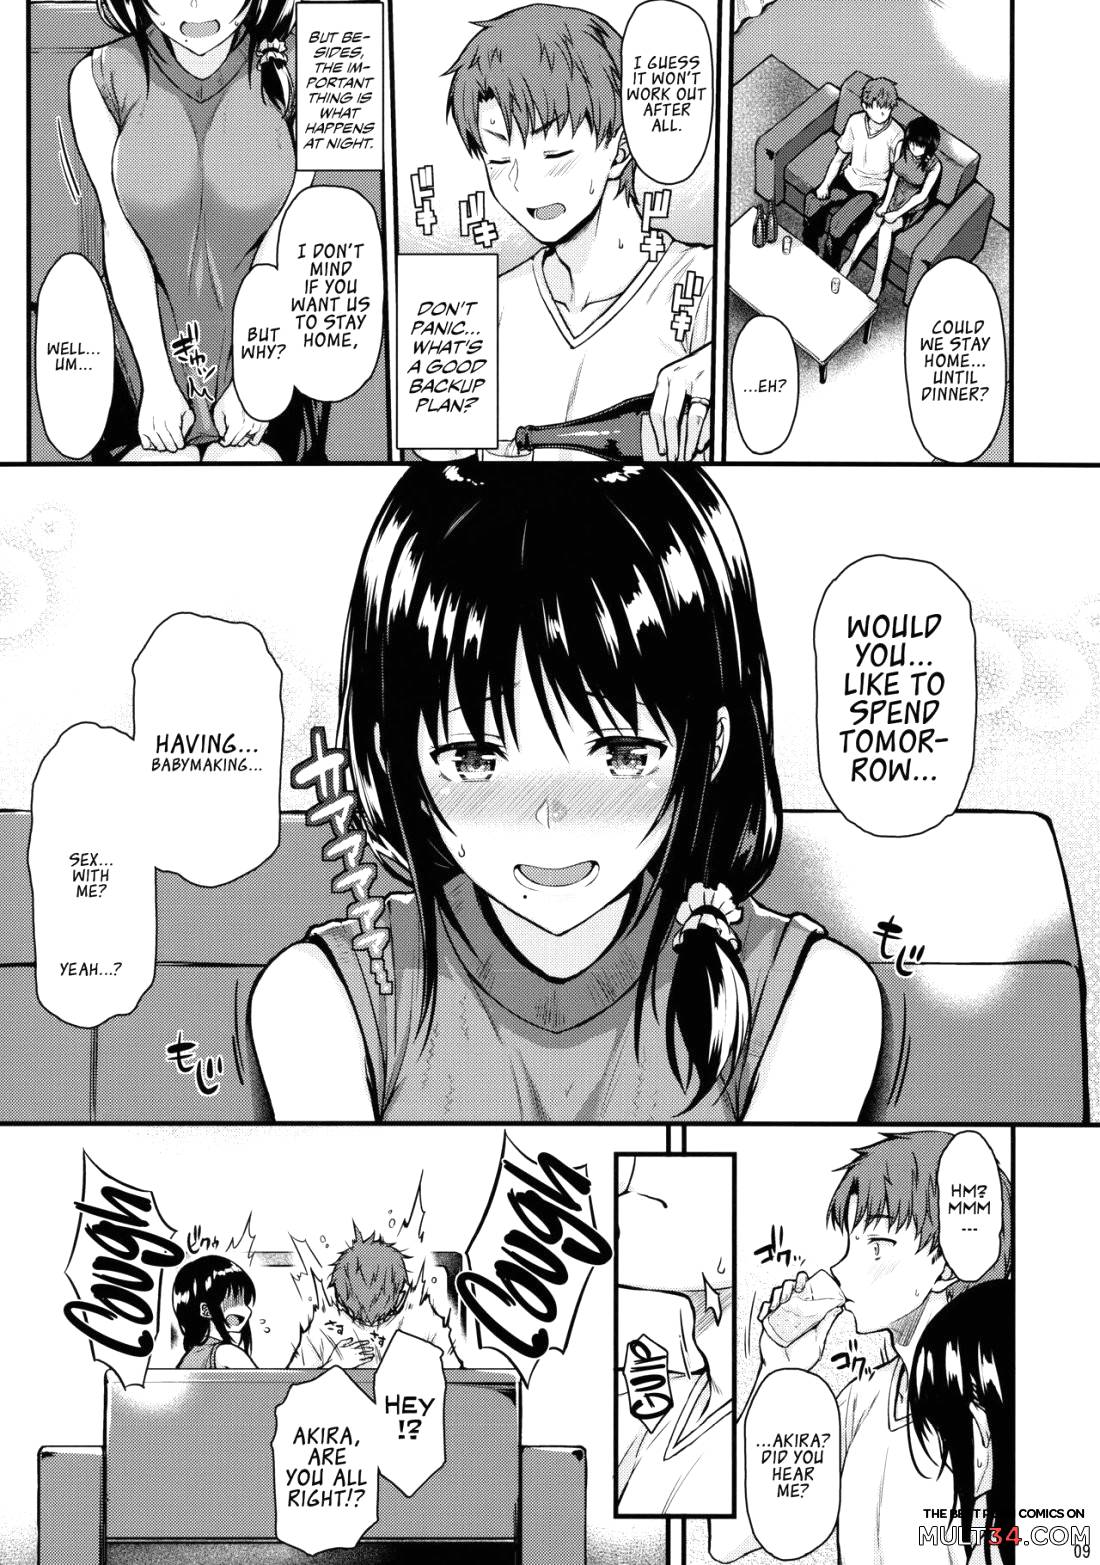 Baby making sex with Megumi page 8